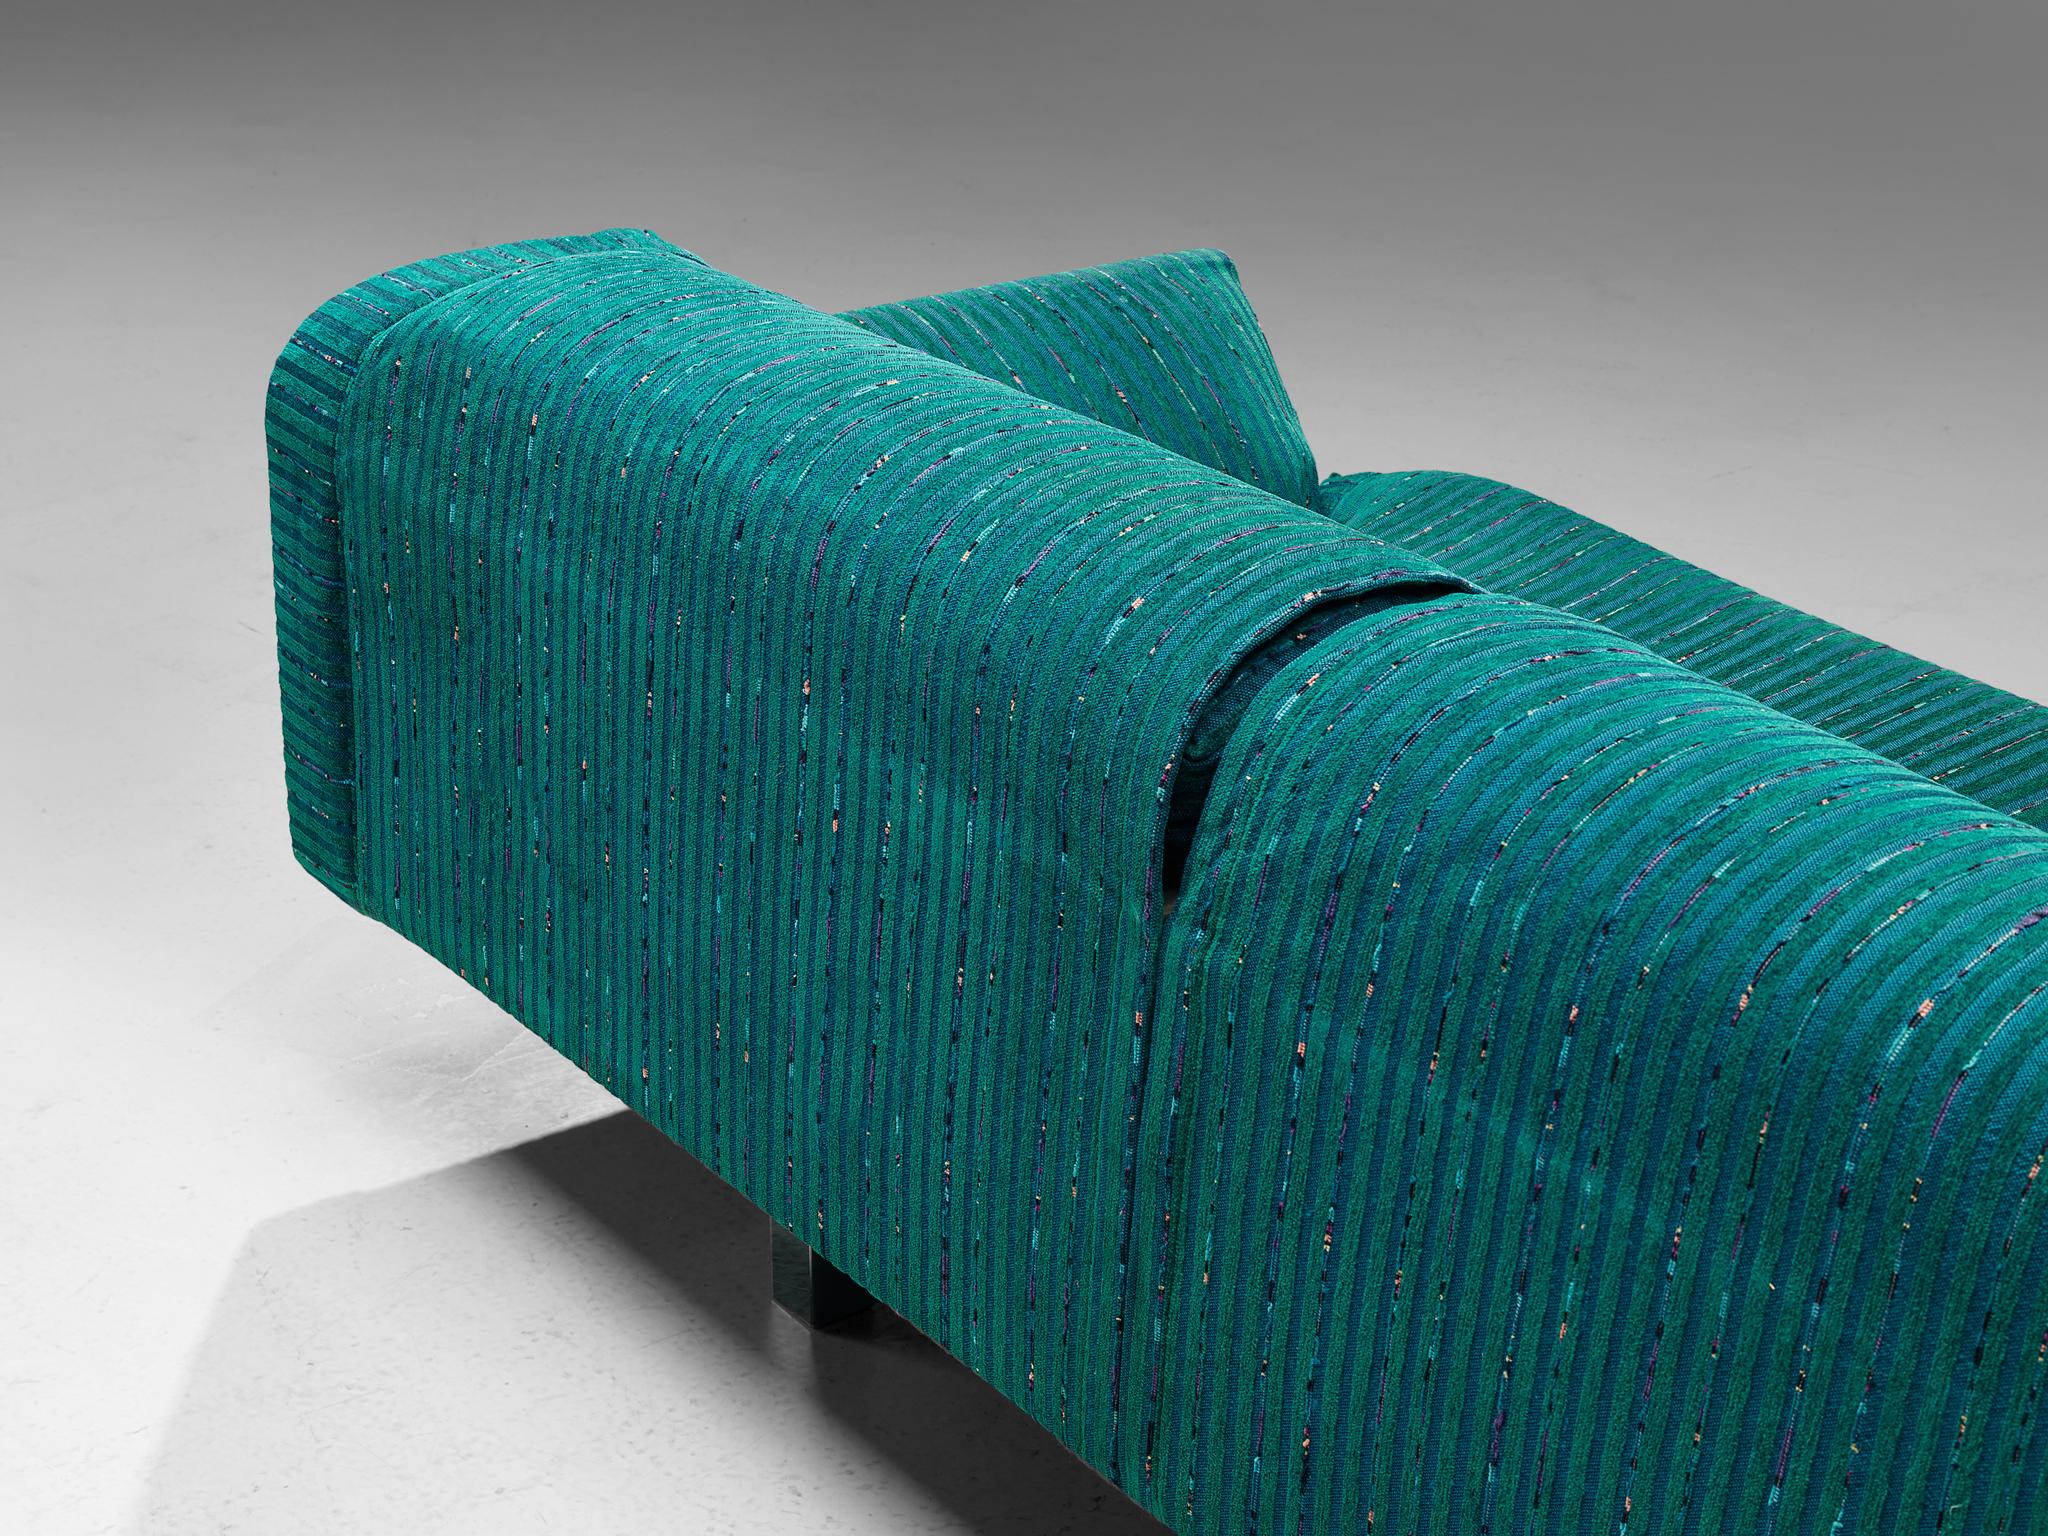 Saporiti Large Sofa in Structured Turquoise Upholstery 1